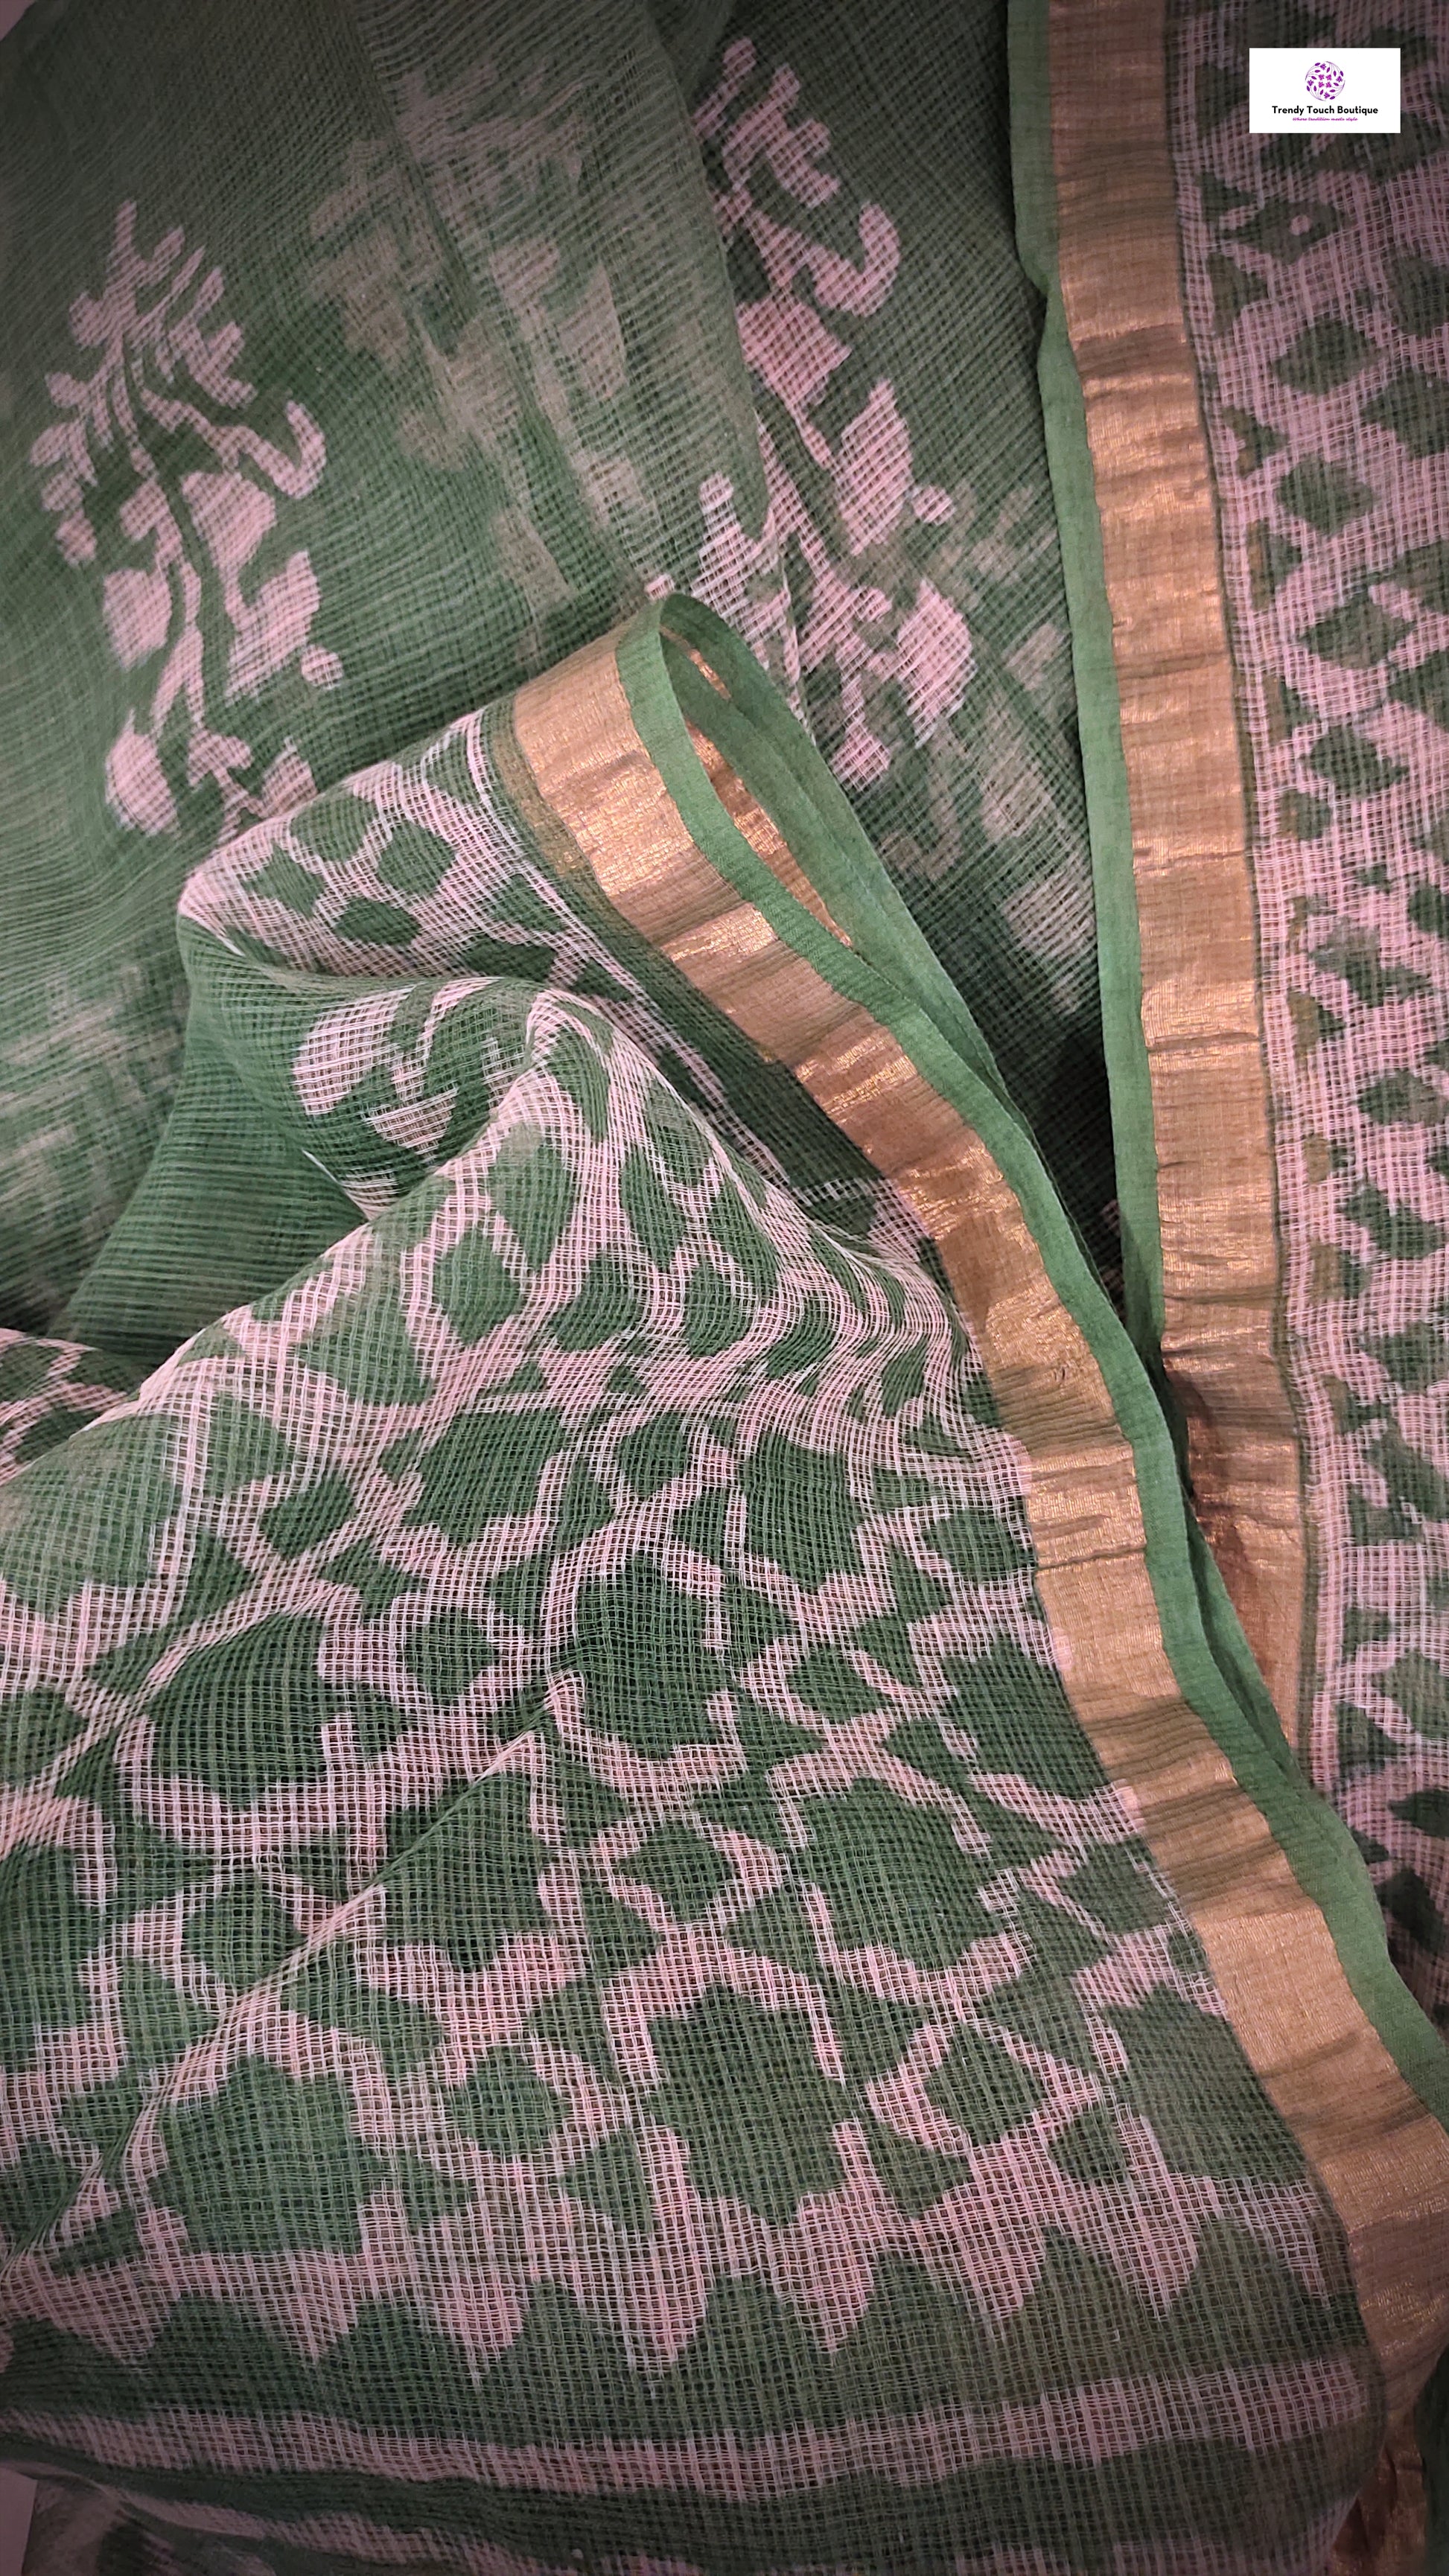 Organic Kota Doria Saree Handblock print in natural dye green soft best summer saree for office and casual outing best price with blouse piece